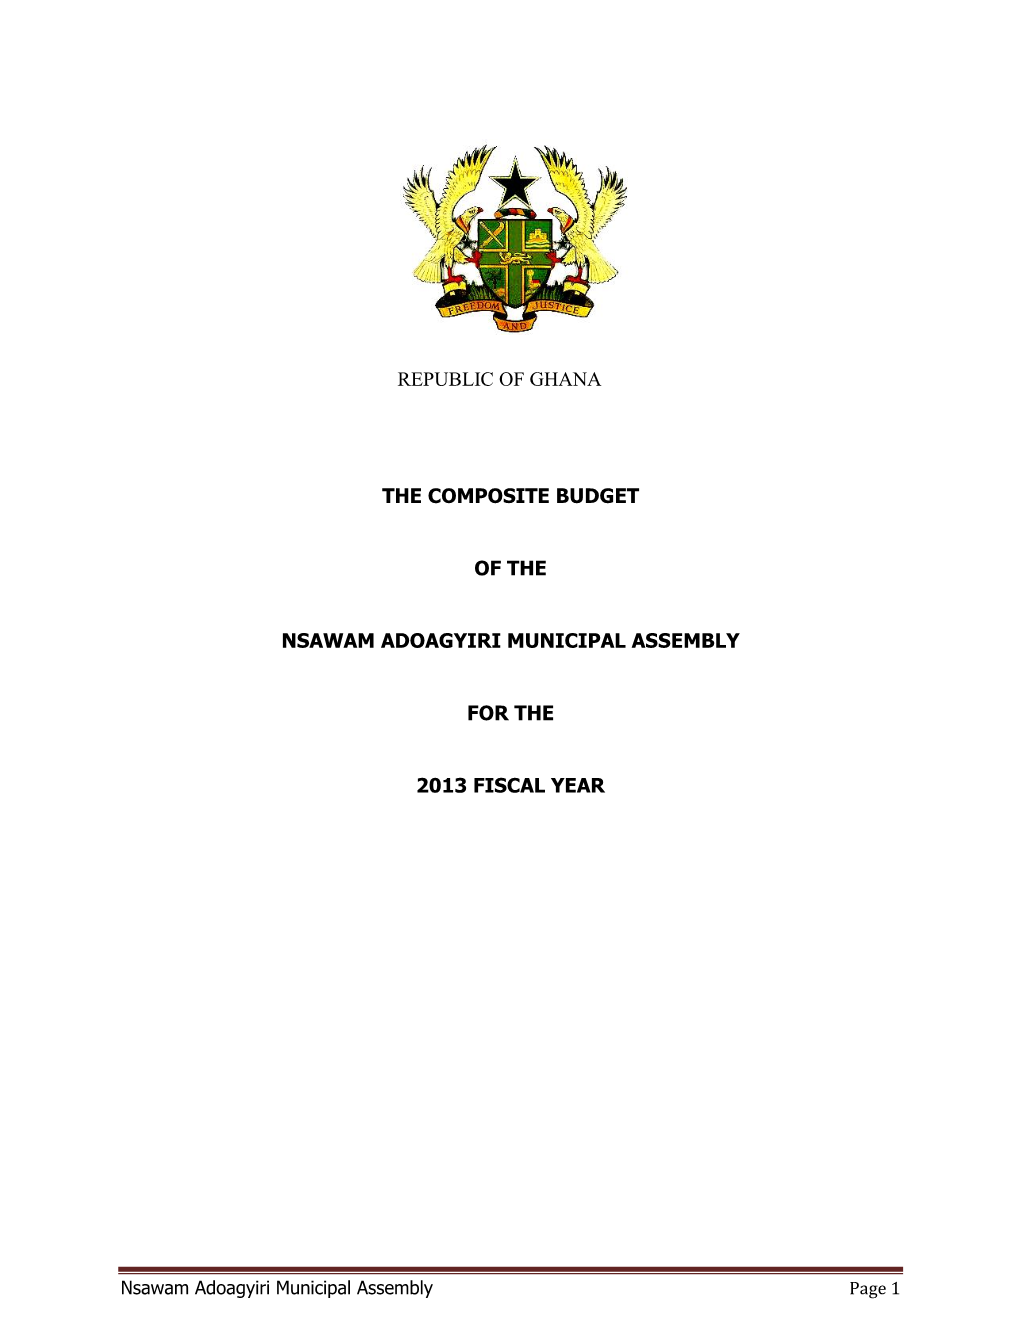 The Composite Budget of the Nsawam Adoagyiri Municipal